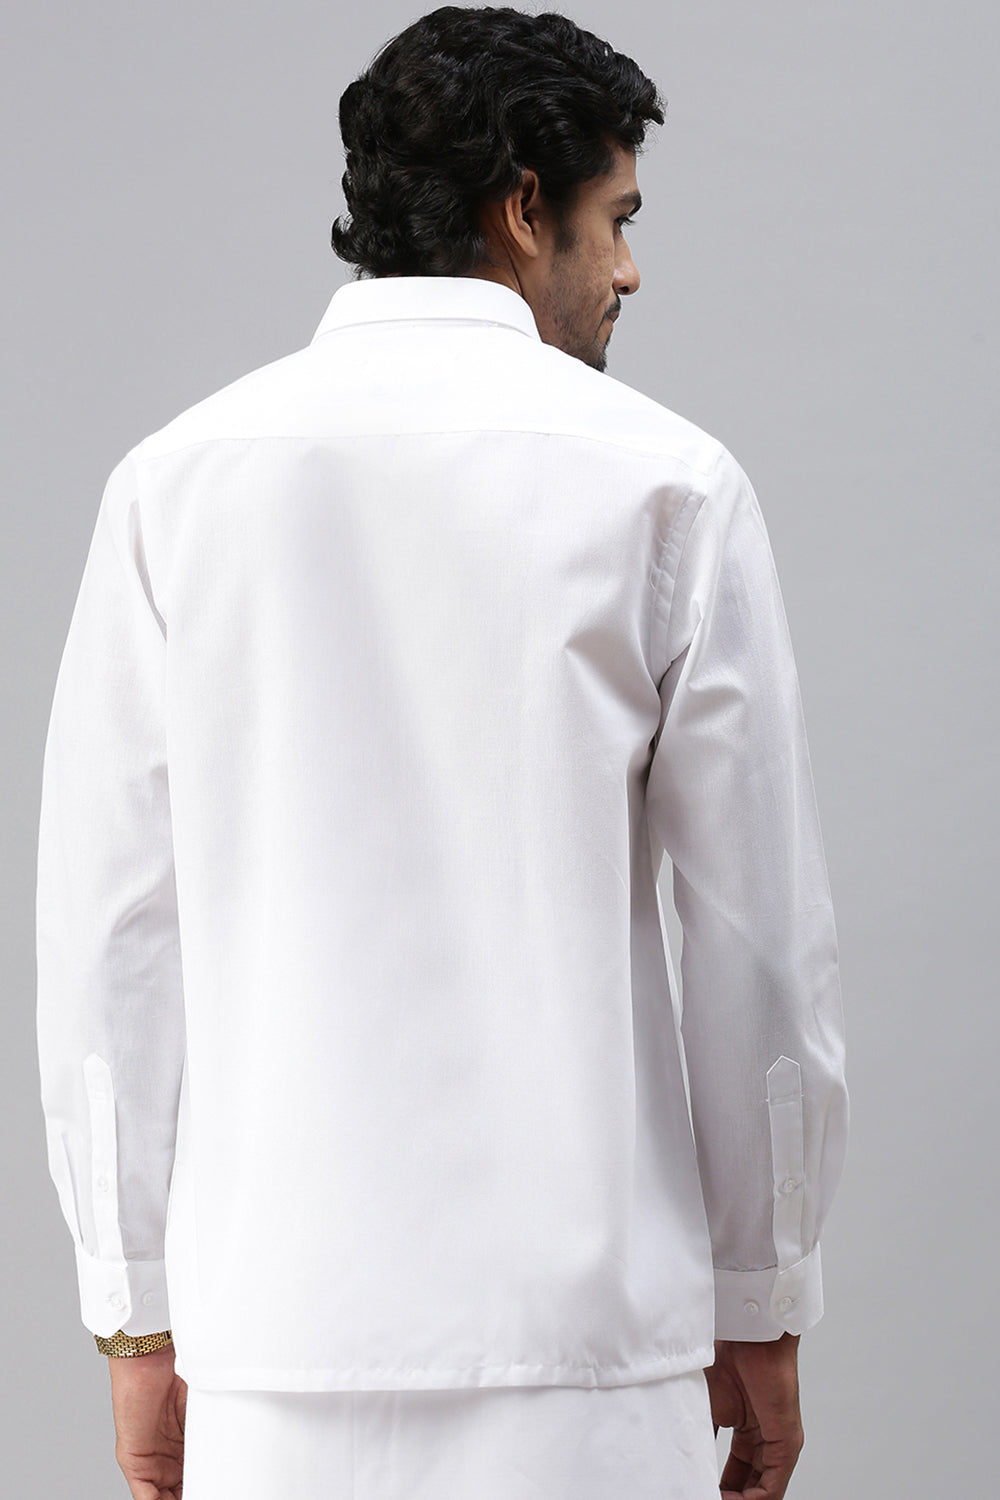 Mens Cotton White Shirt Full Sleeves Viceroy-Back view